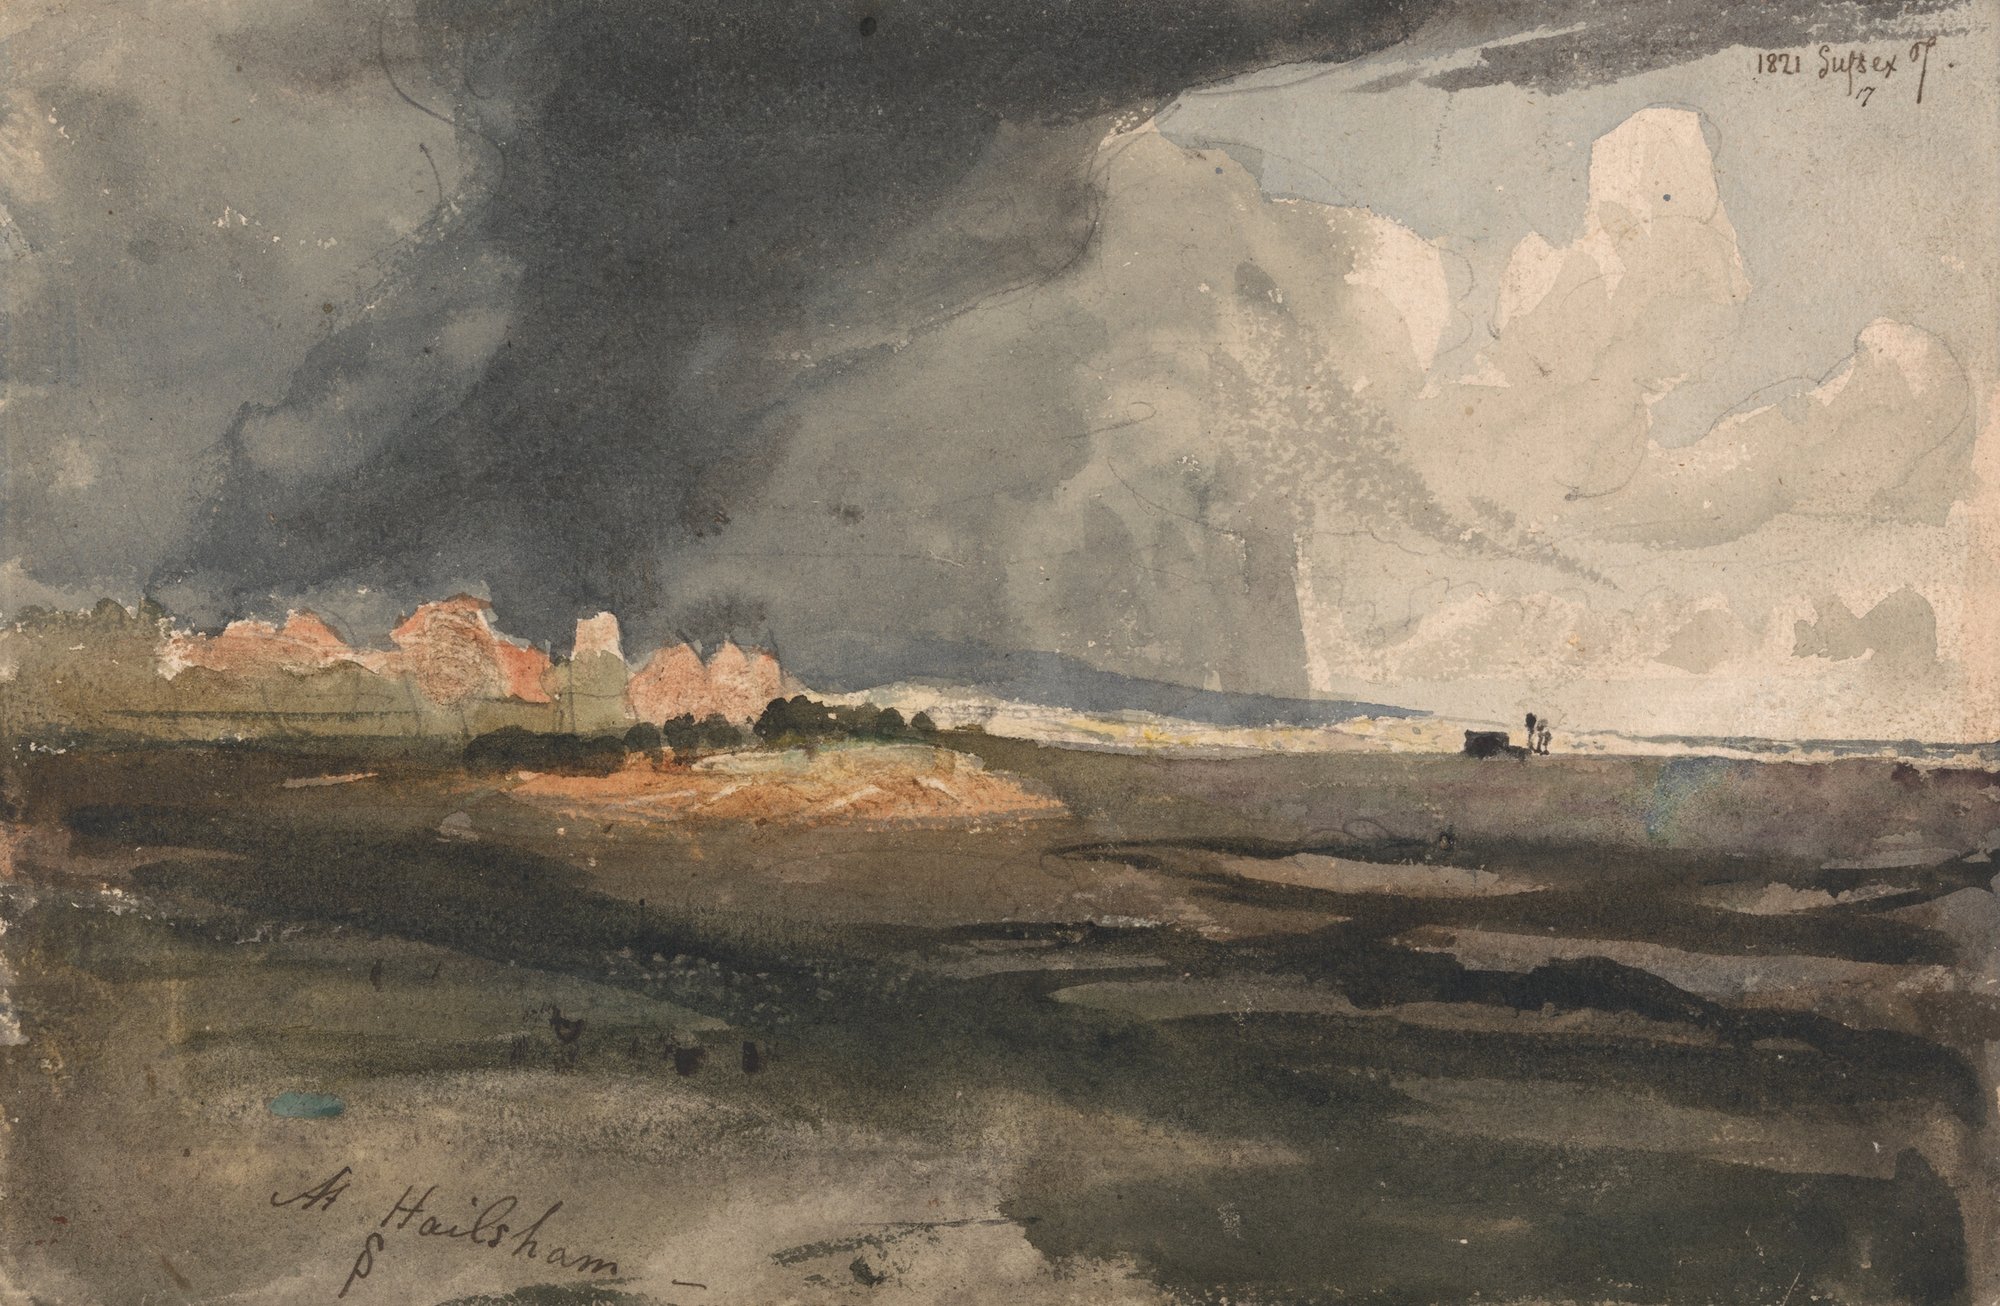 At Hailsham, Sussex; a Storm Approaching (1821)